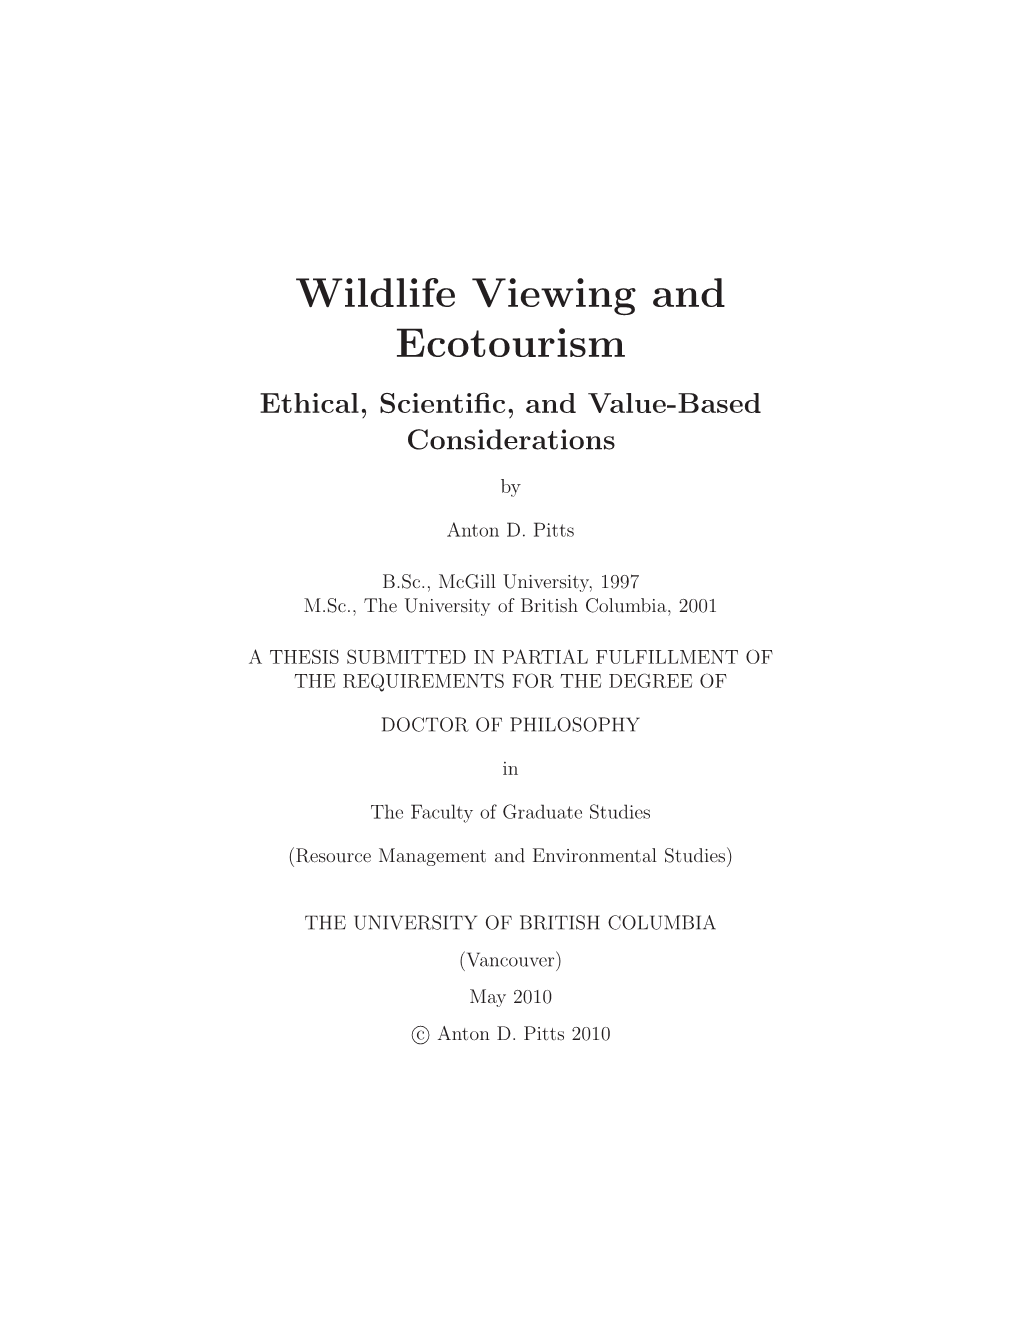 Wildlife Viewing and Ecotourism Ethical, Scientiﬁc, and Value-Based Considerations